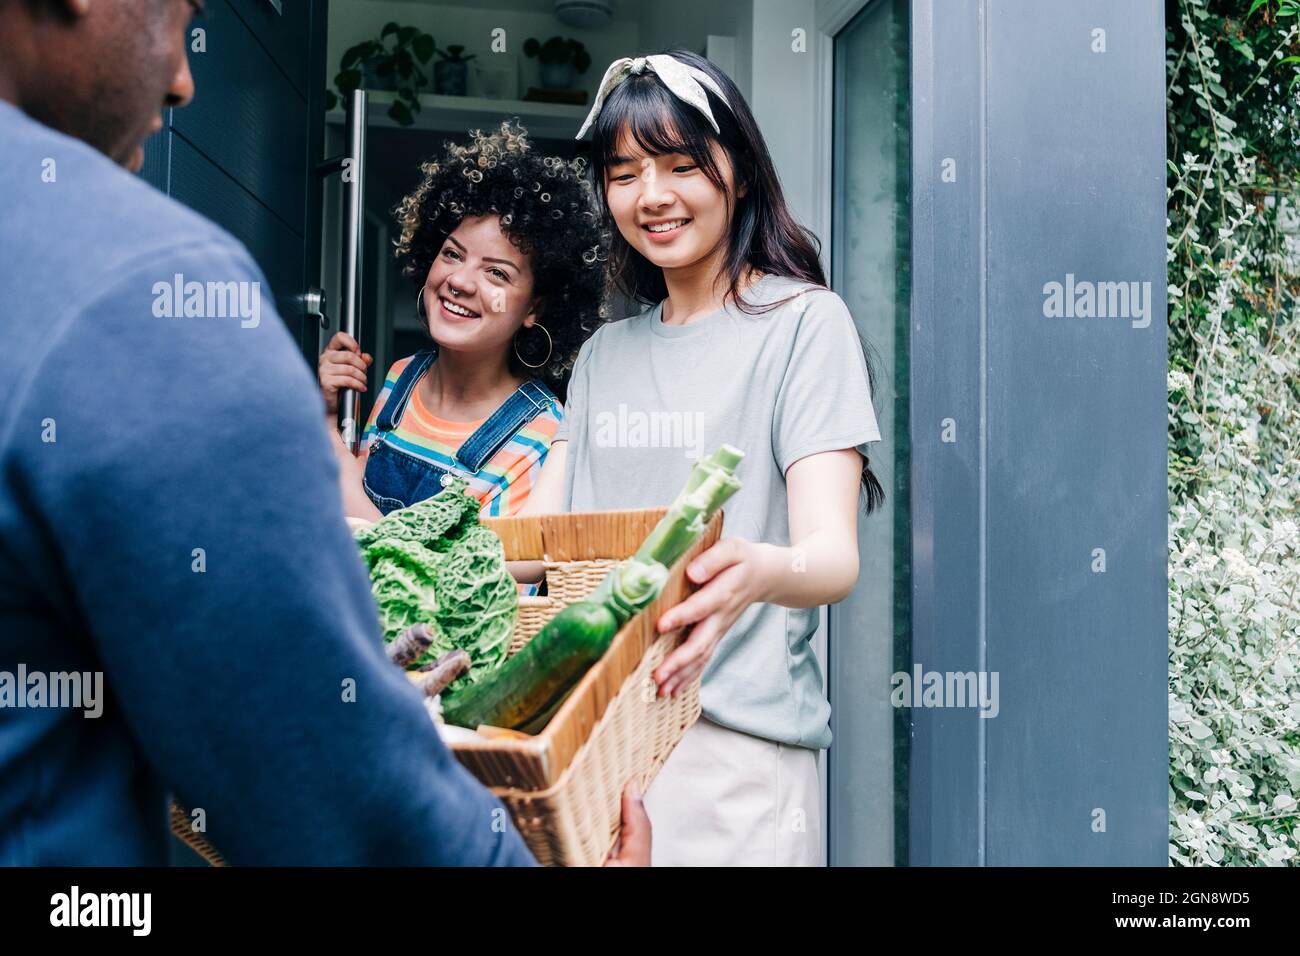 Male delivery person delivering fresh vegetable to women at doorway Stock Photo